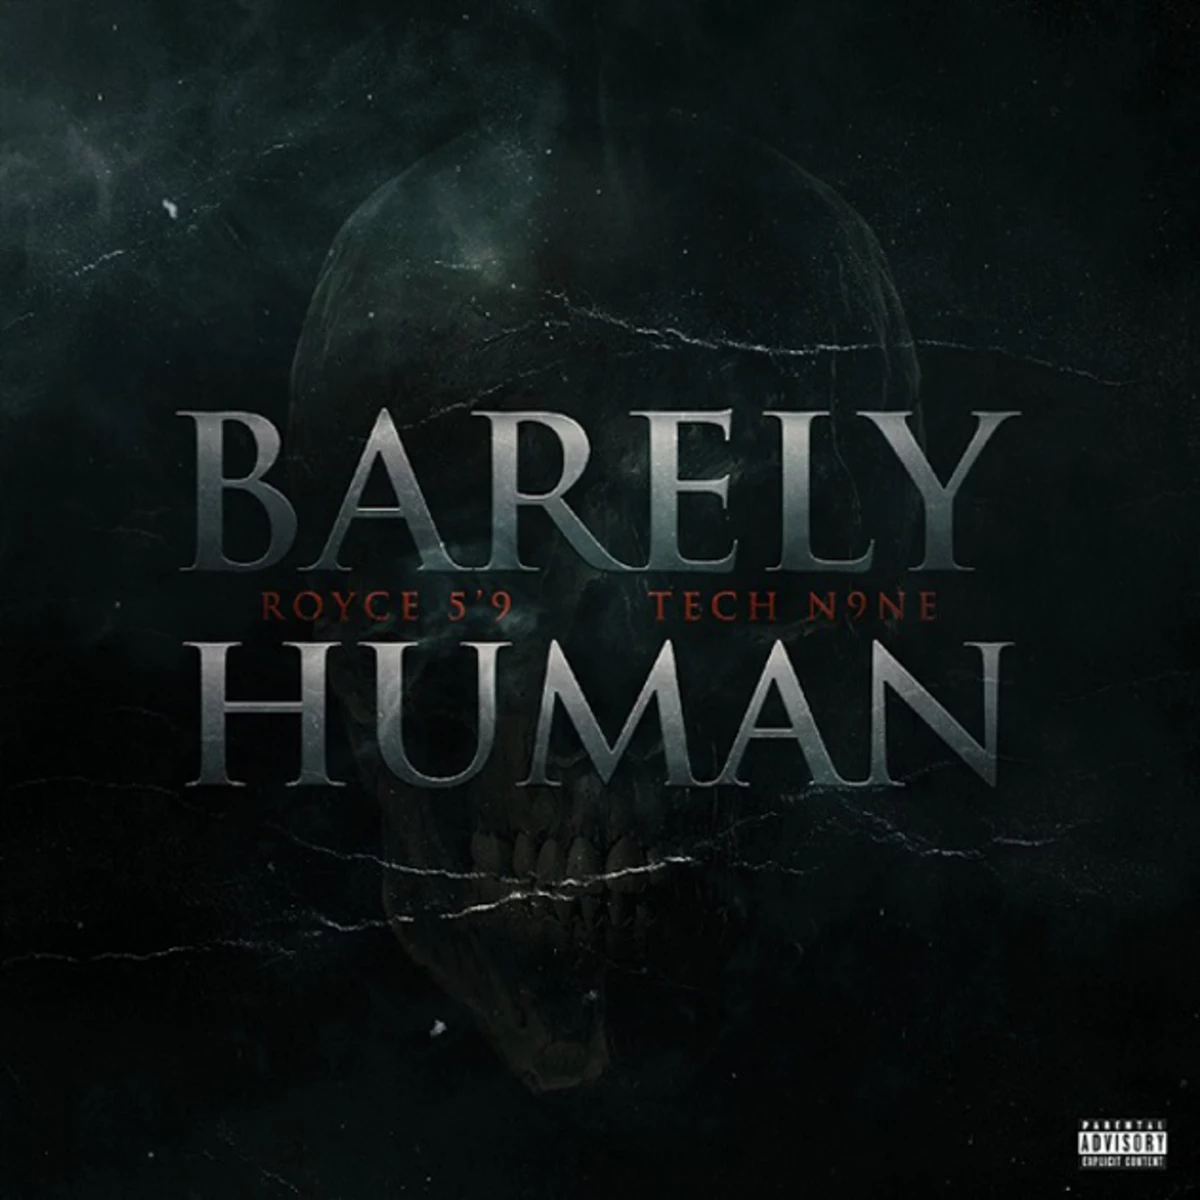 Royce 5'9" and Tech N9ne Are 'Barely Human' on New Collab - XXL